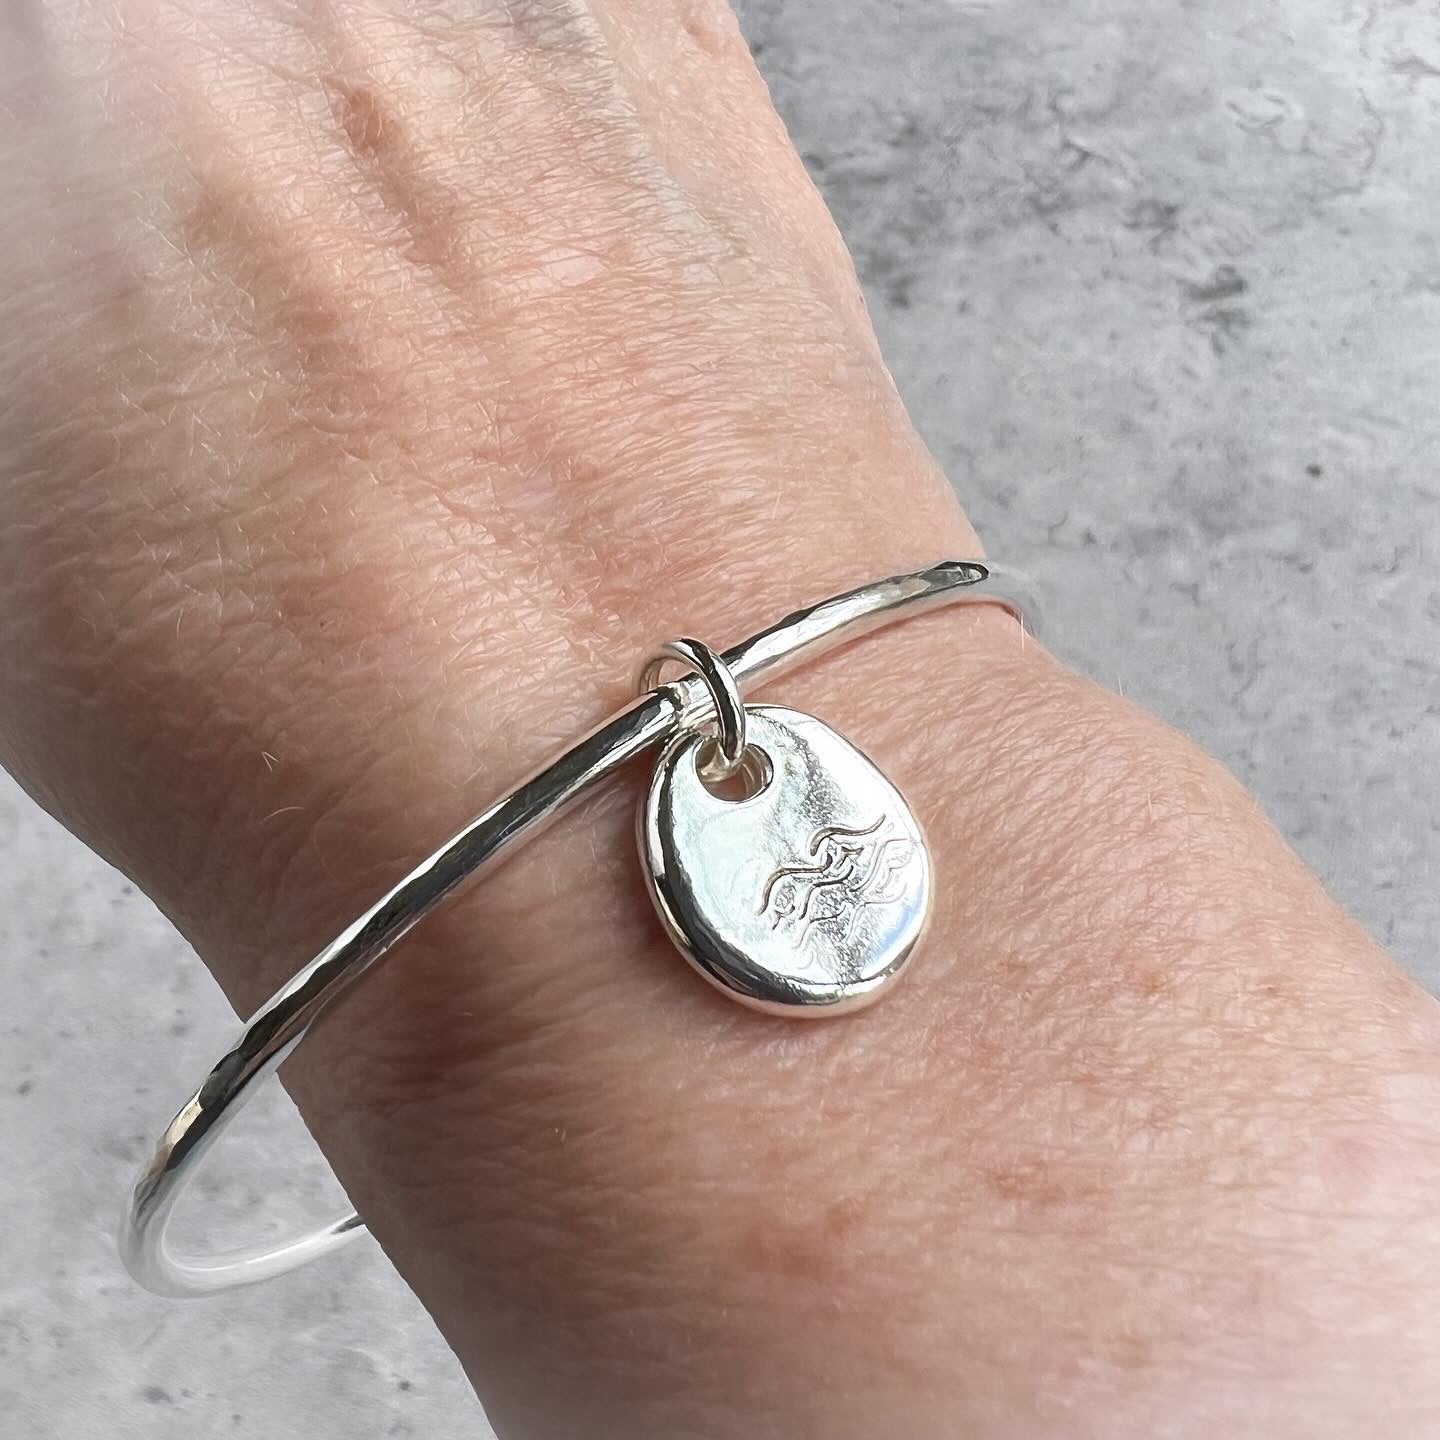 Water Therapy Bangle Bracelet with Wave Charm